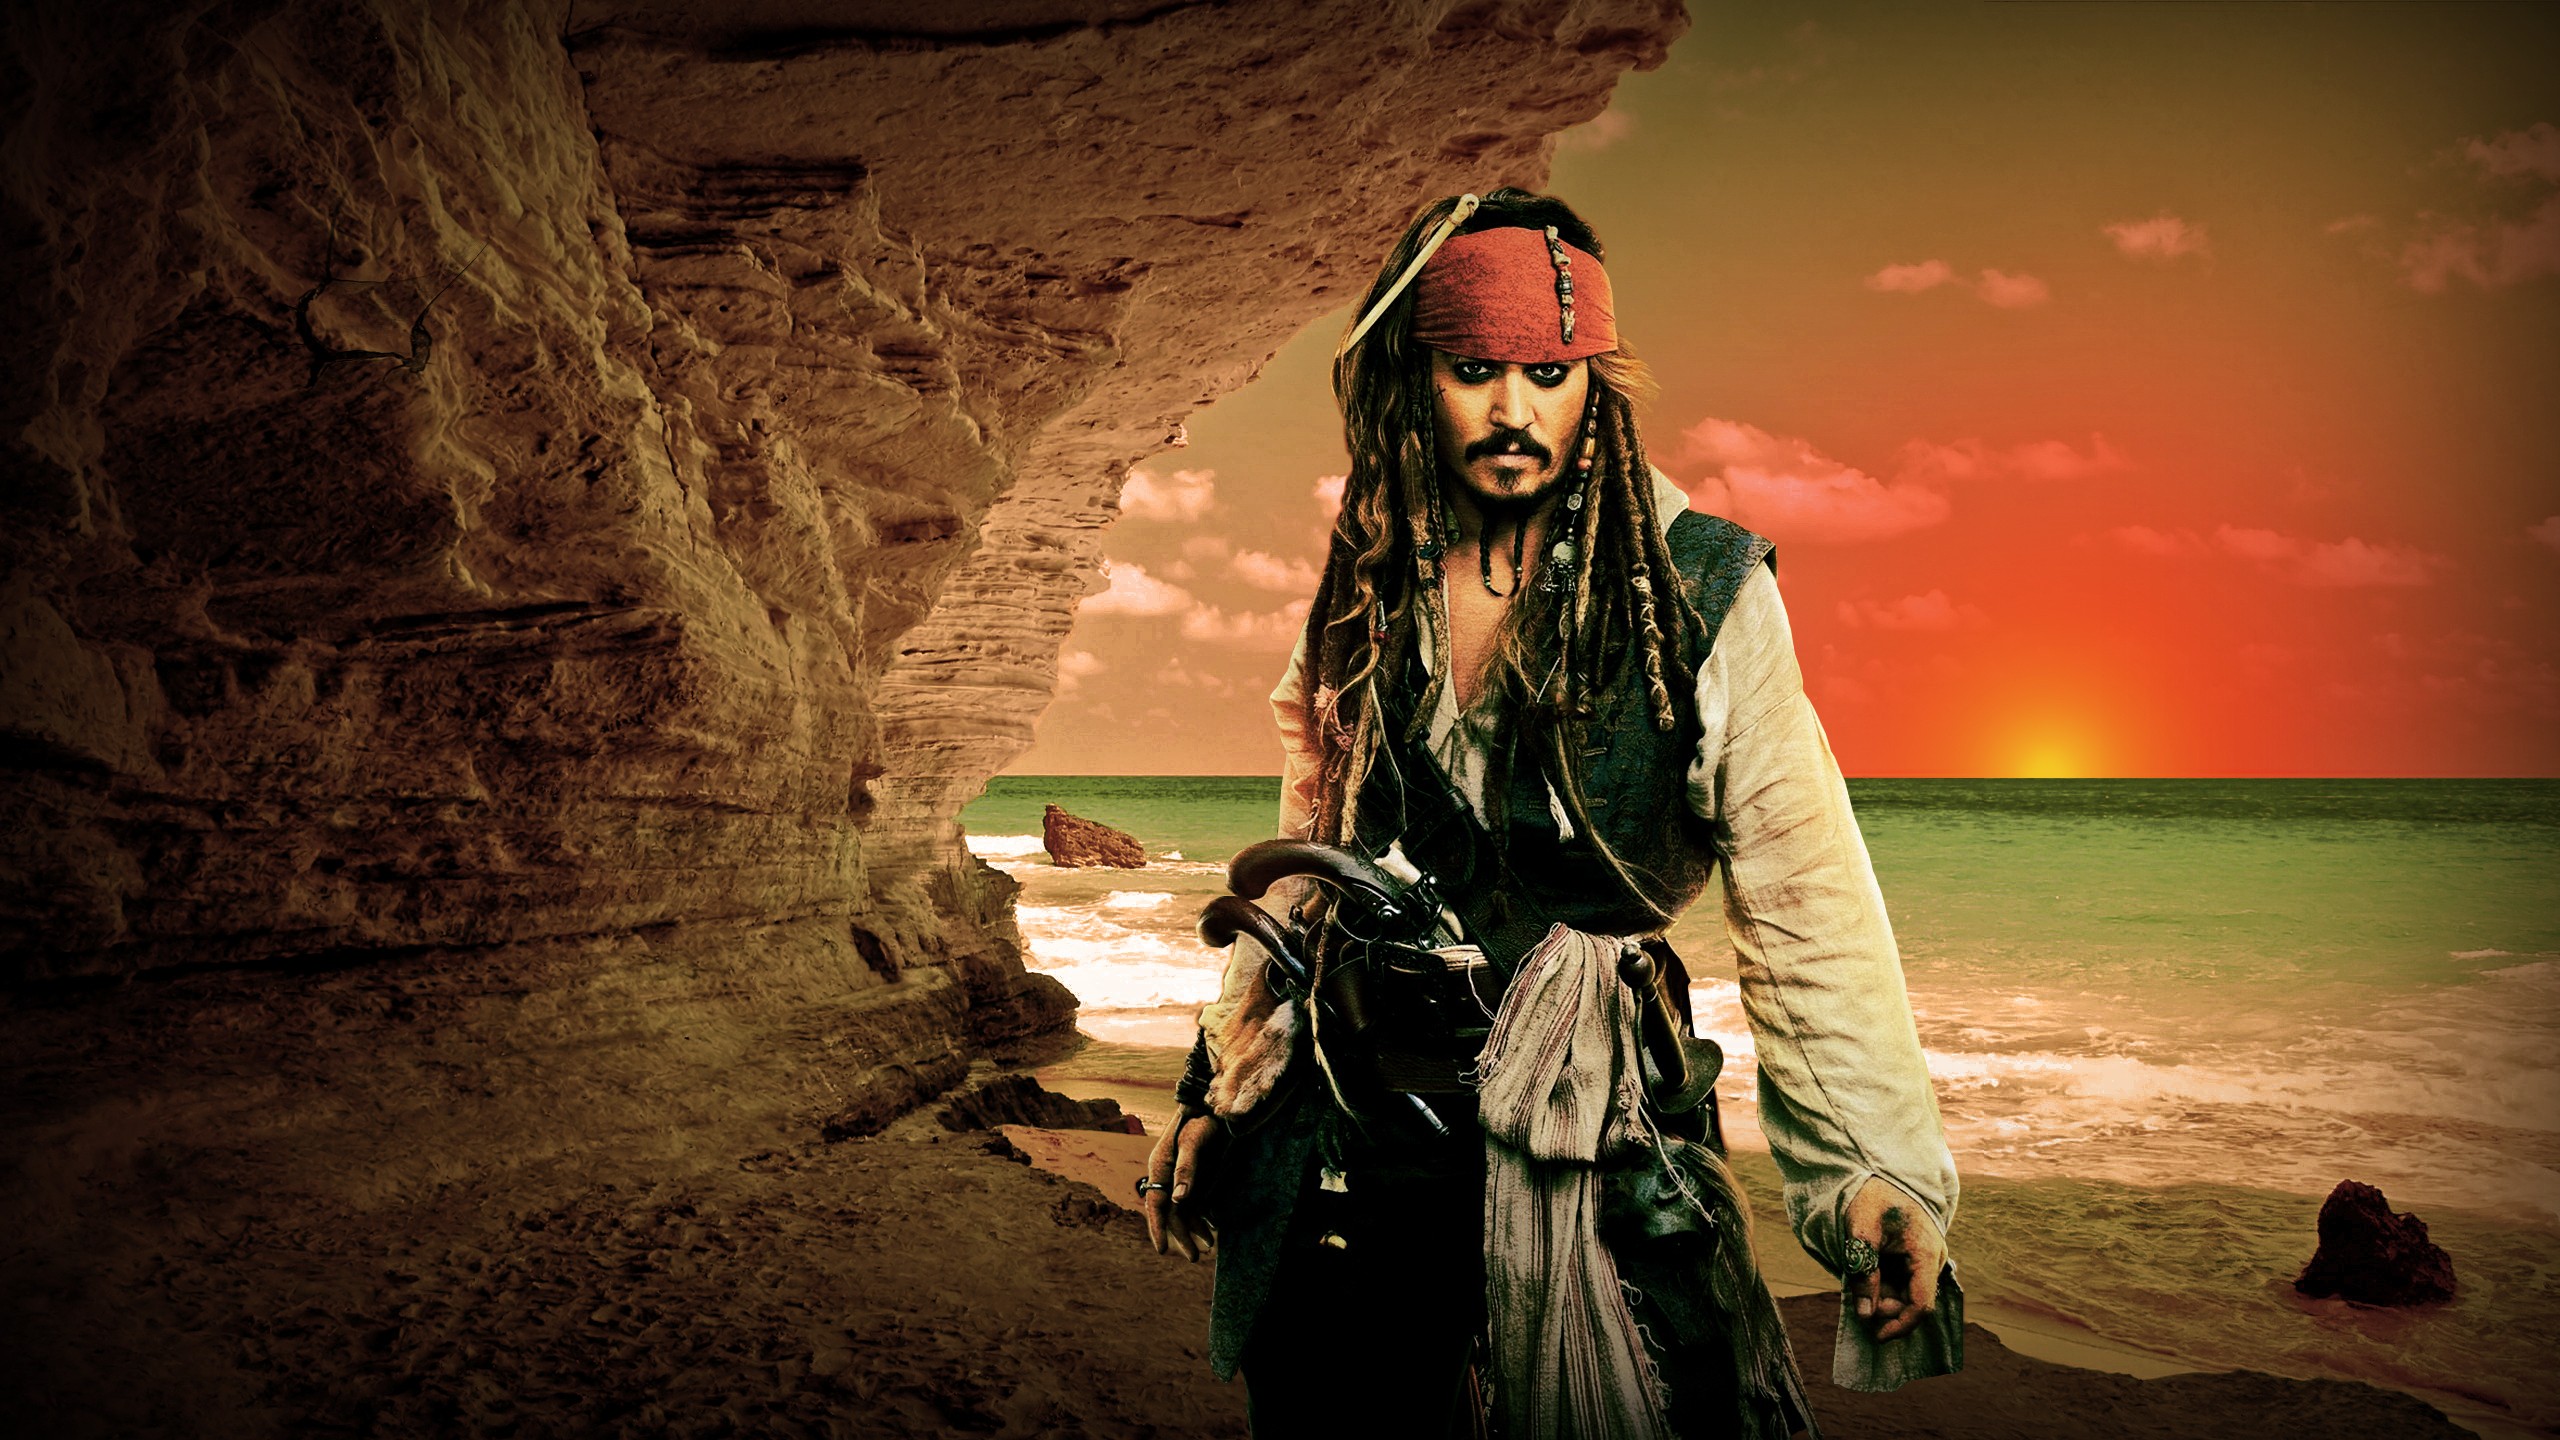 Pirates Of The Caribbean HD Wallpaper Background Image